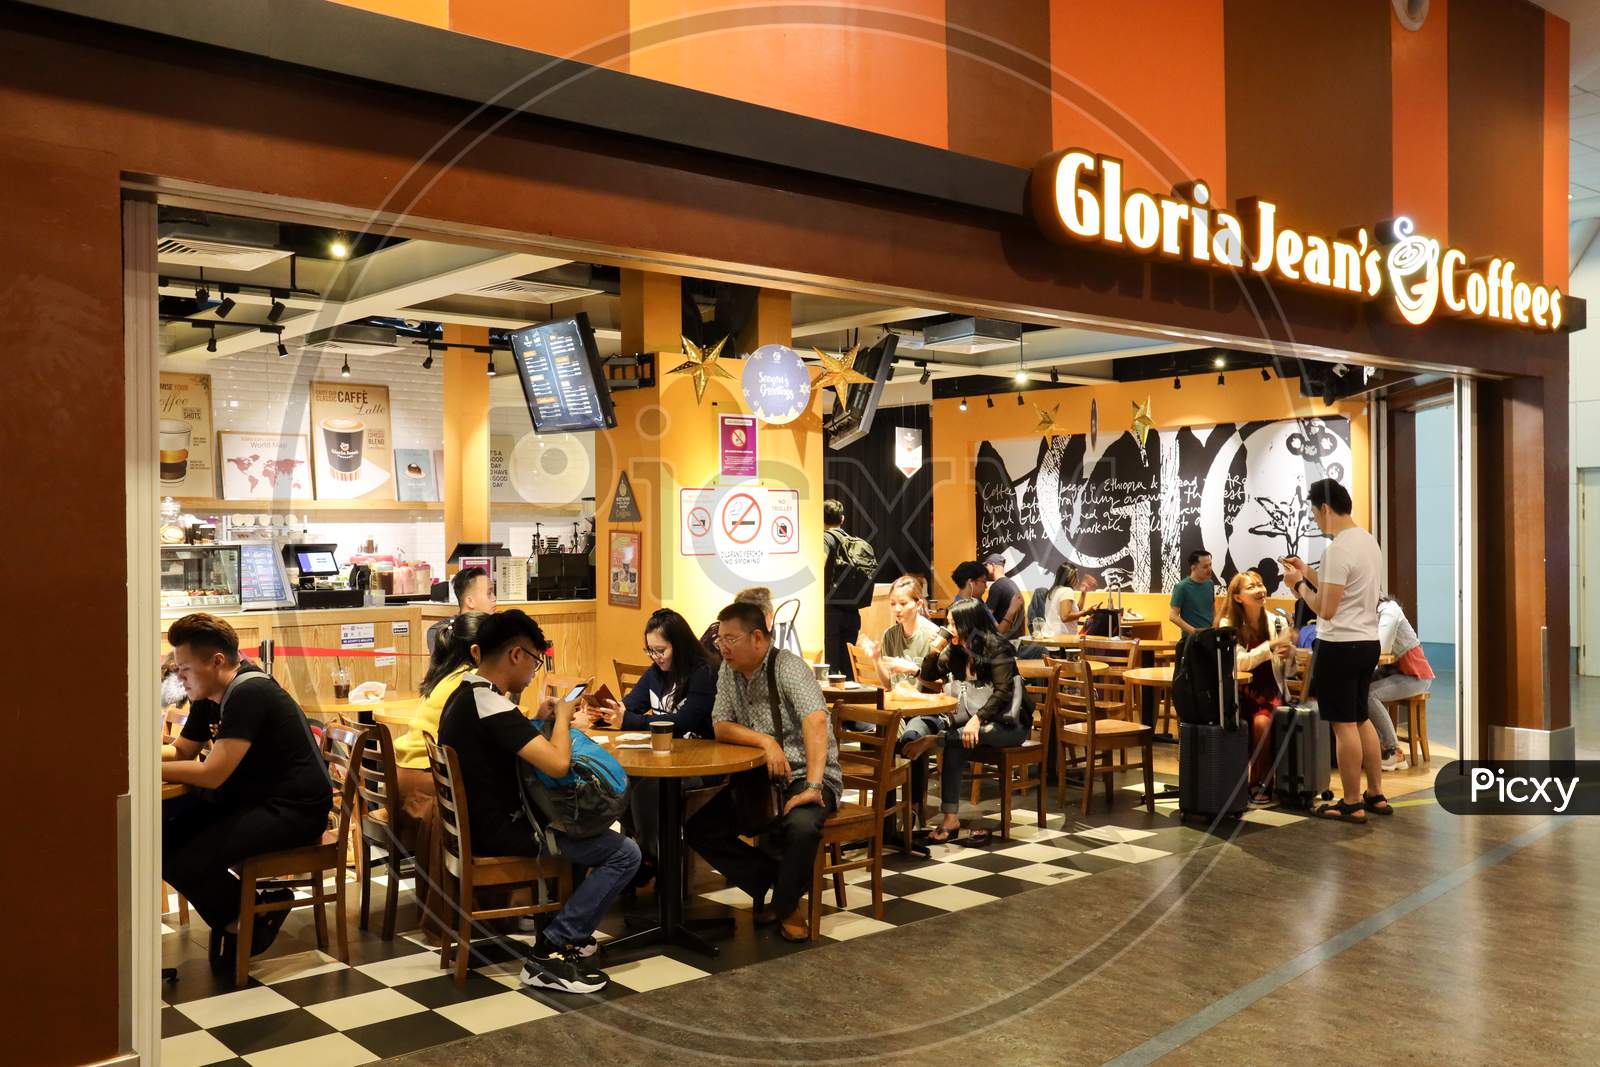 Passengers Having Coffee in Gloria Jeans Coffees At KL International Airport , Malaysia